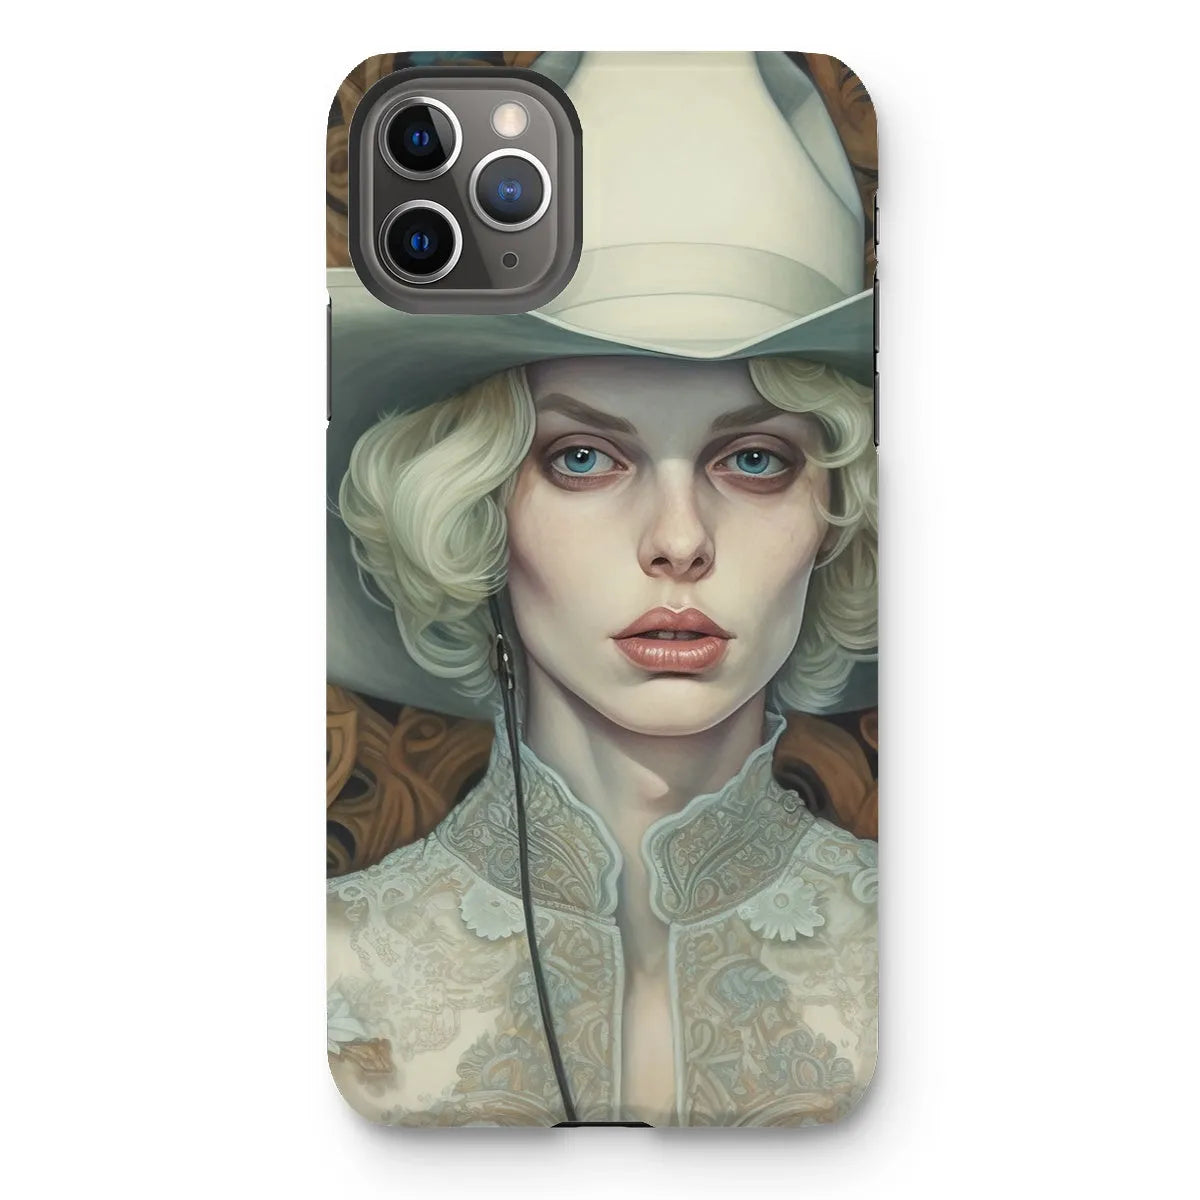 Winnie The Lesbian Cowgirl - Sapphic Art Phone Case - Iphone 11 Pro Max / Matte - Mobile Phone Cases - Aesthetic Art